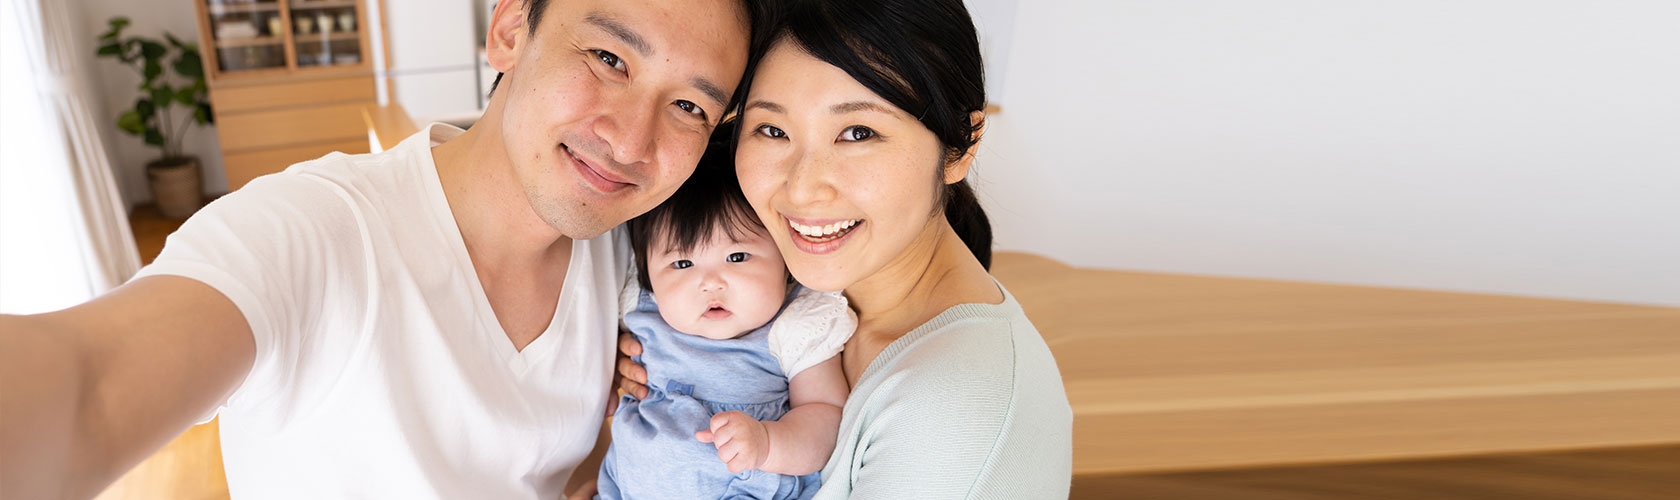 portrait of young asian family